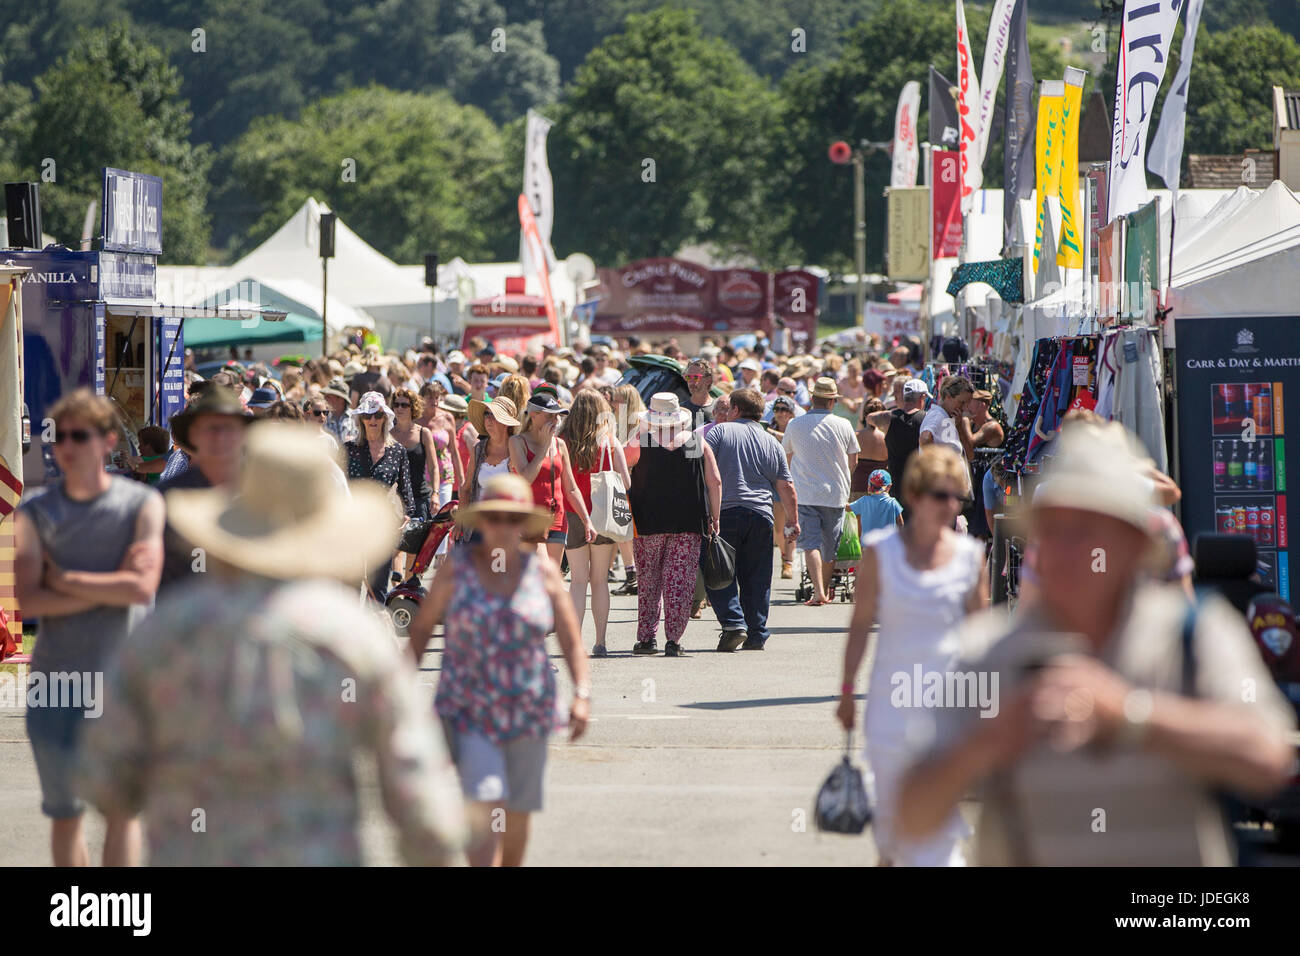 Royal Welsh Show 2016 at the Royal Welsh Showground, Llanelwedd, Builth Wells, Powys, Wales, UK, July 19th 2016. Stock Photo